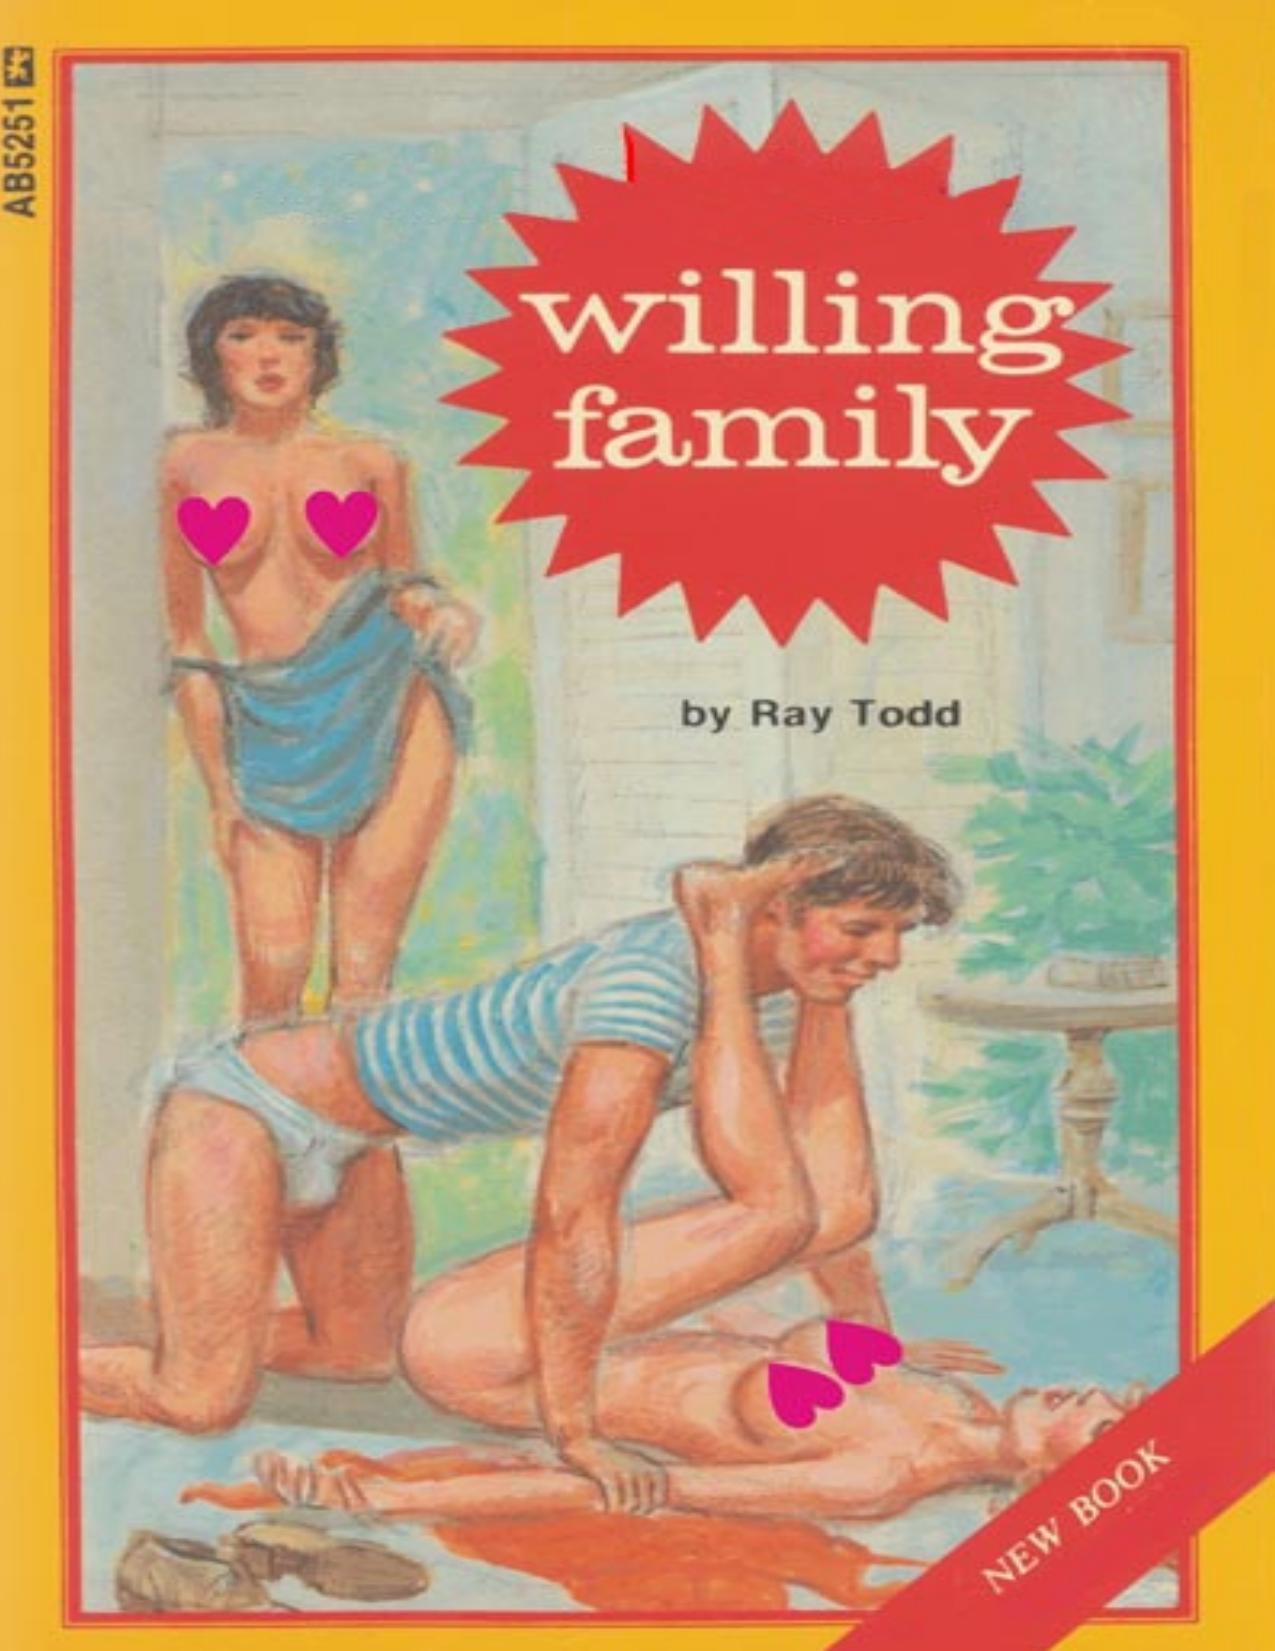 Willing Family by Ray Todd